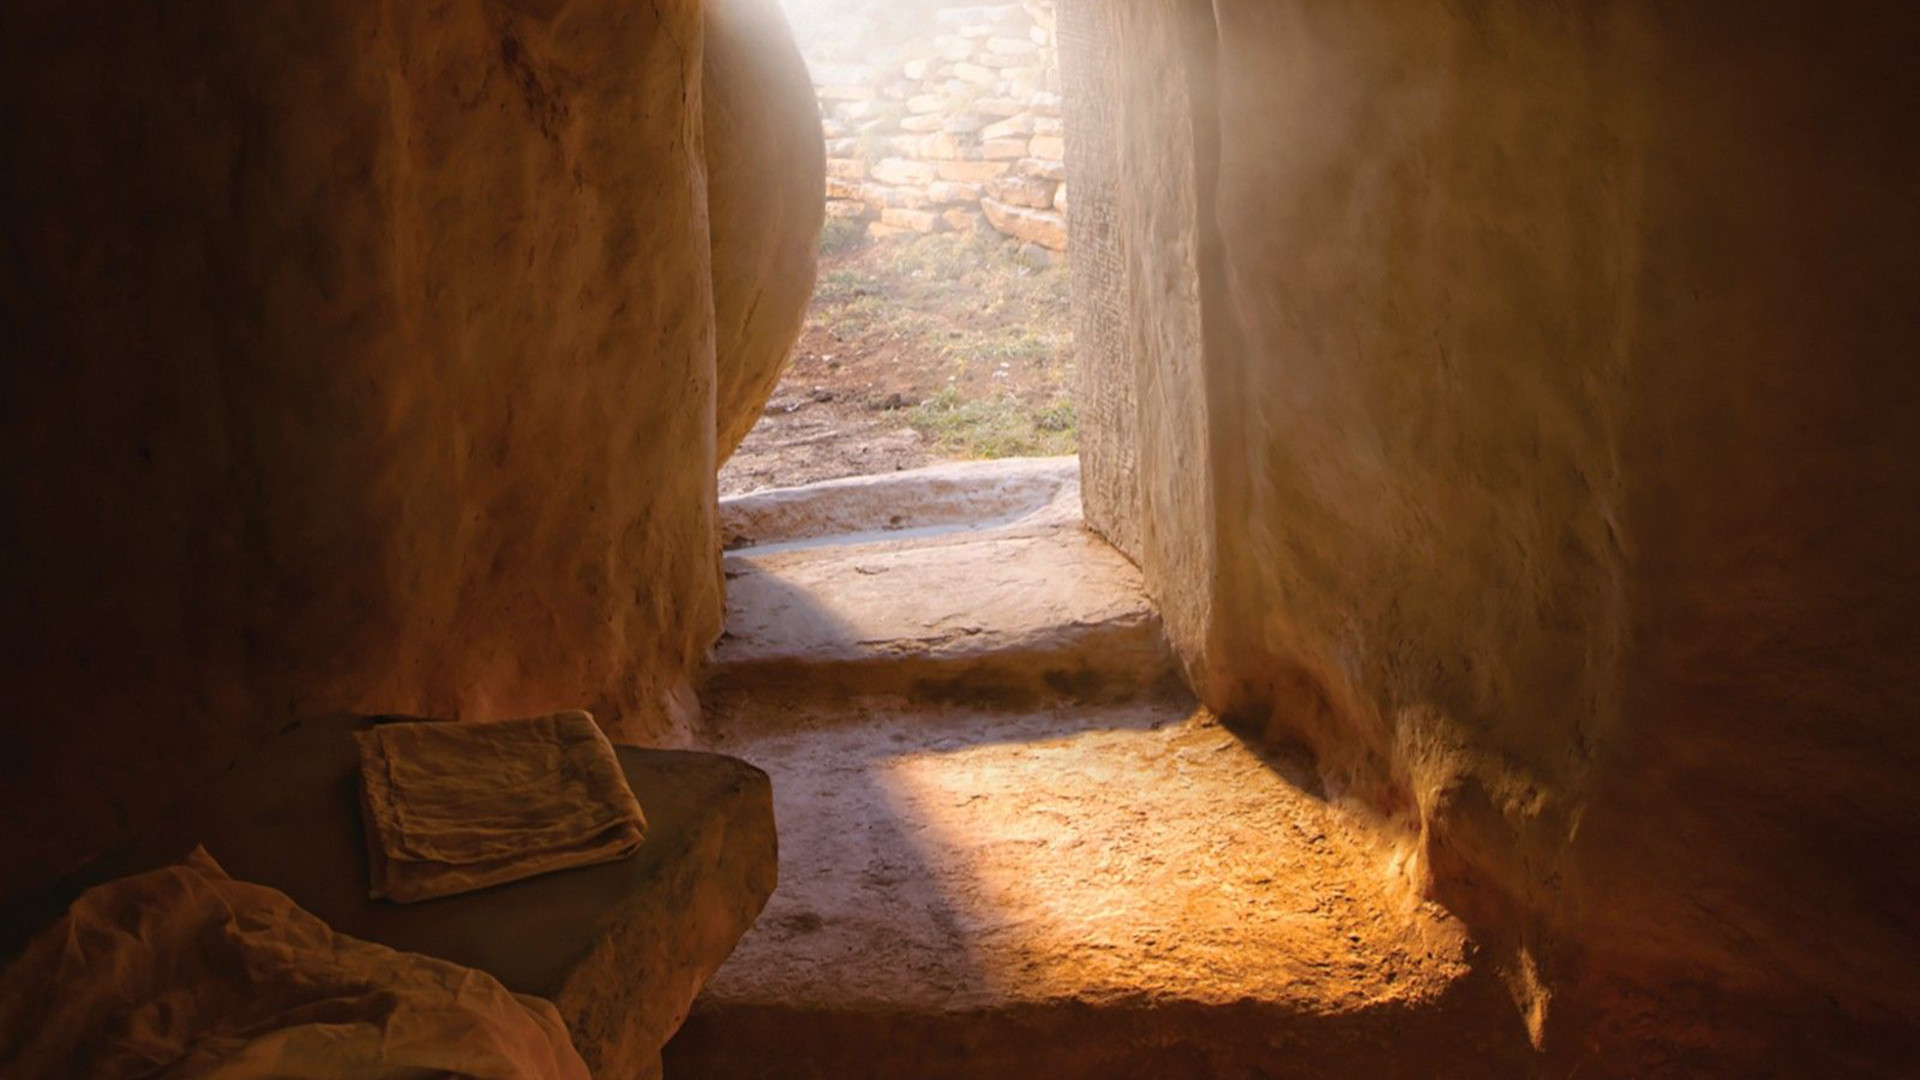 Light shines into the empty, open tomb of Jesus Christ.